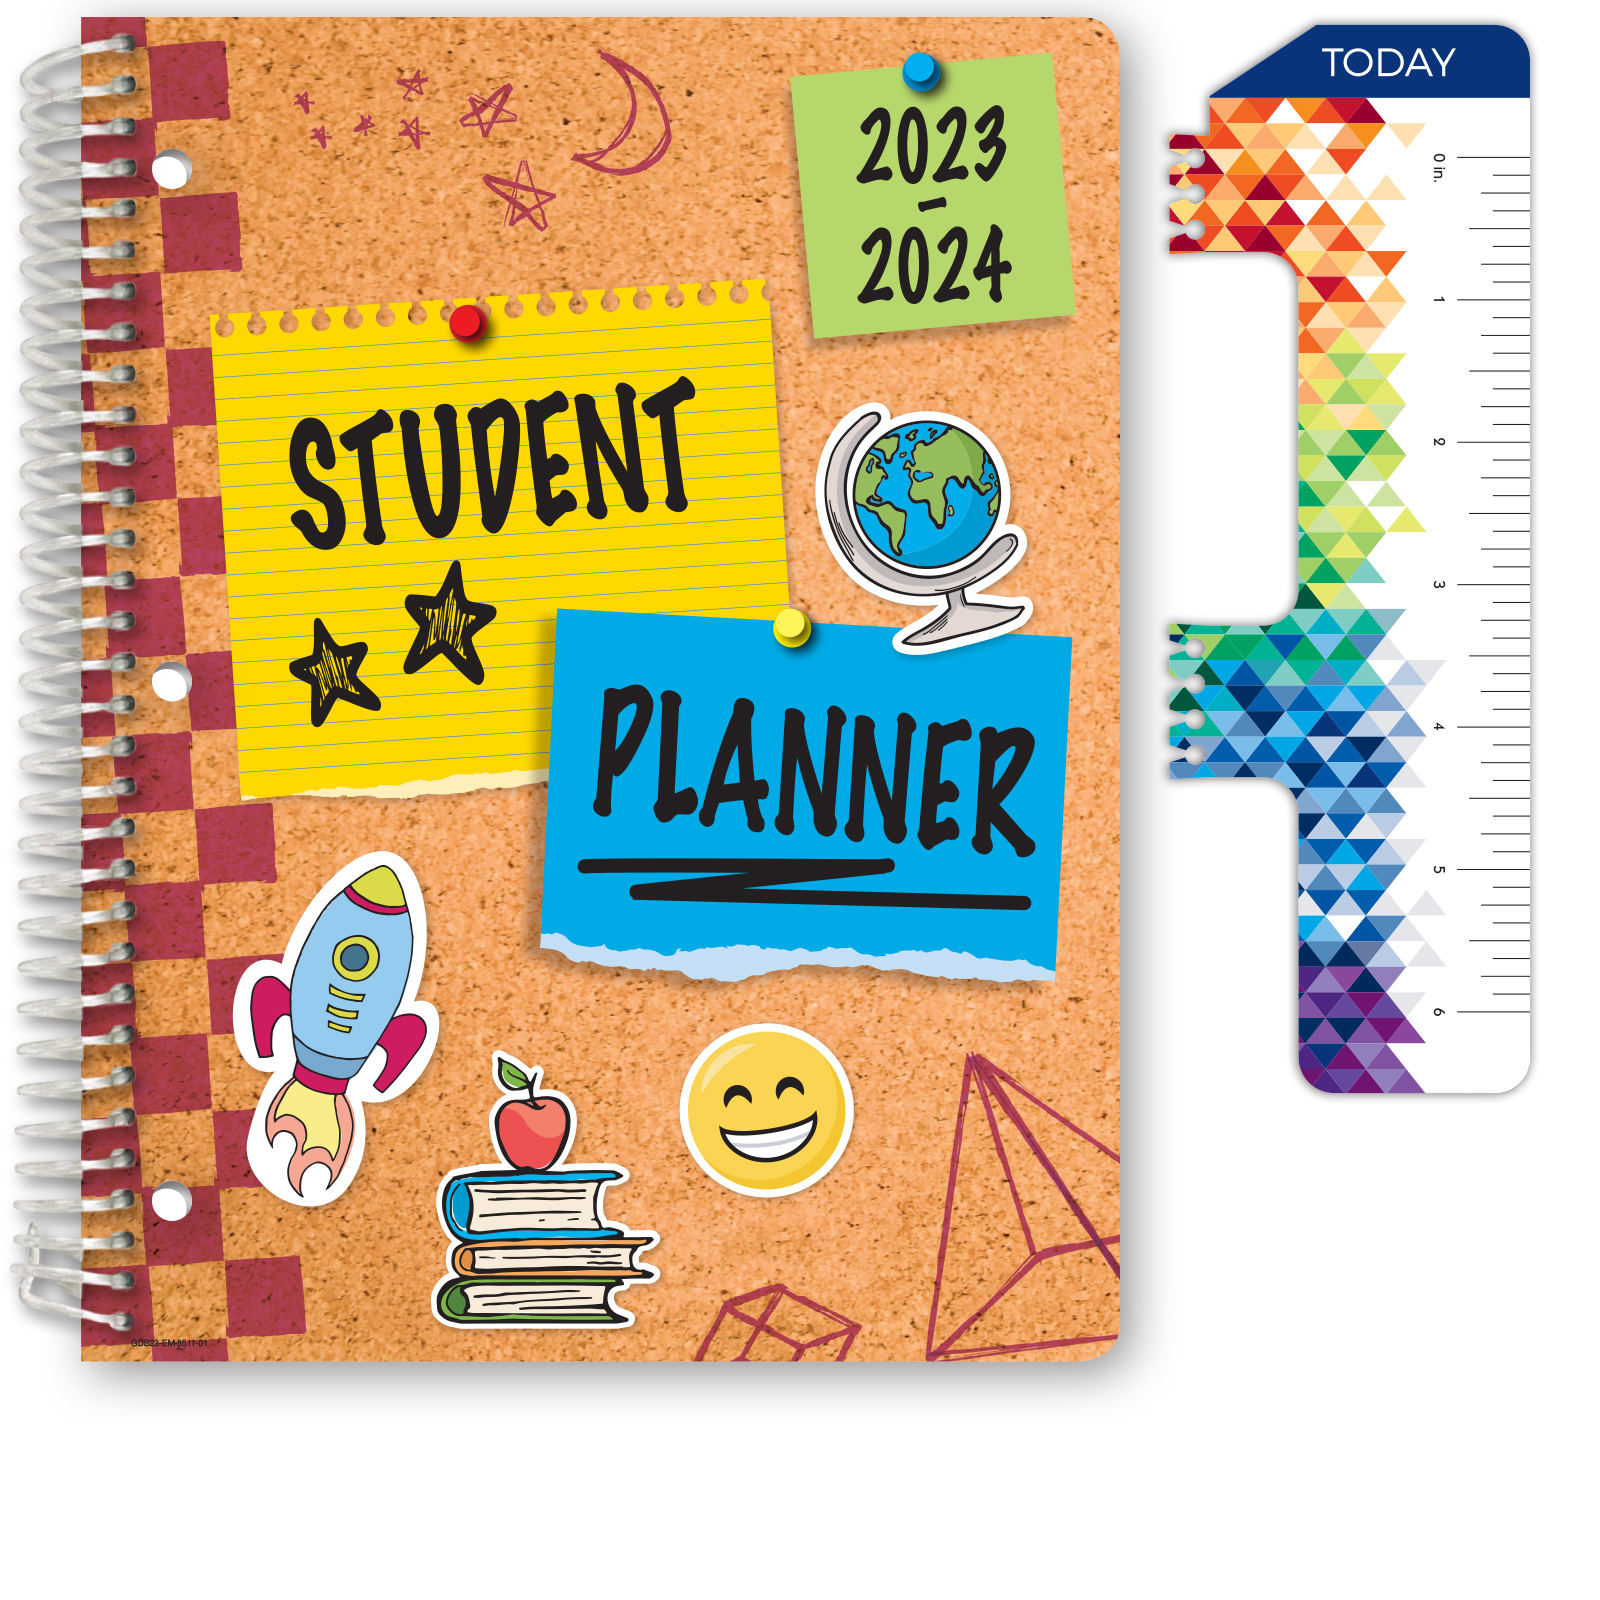 Global Datebooks Dated Elementary Student Planner for Academic Year 2023-2024 Includes Ruler/Bookmark and Planning Stickers (Matrix Style - 8.5"x11" - Corkboard) - image 1 of 10